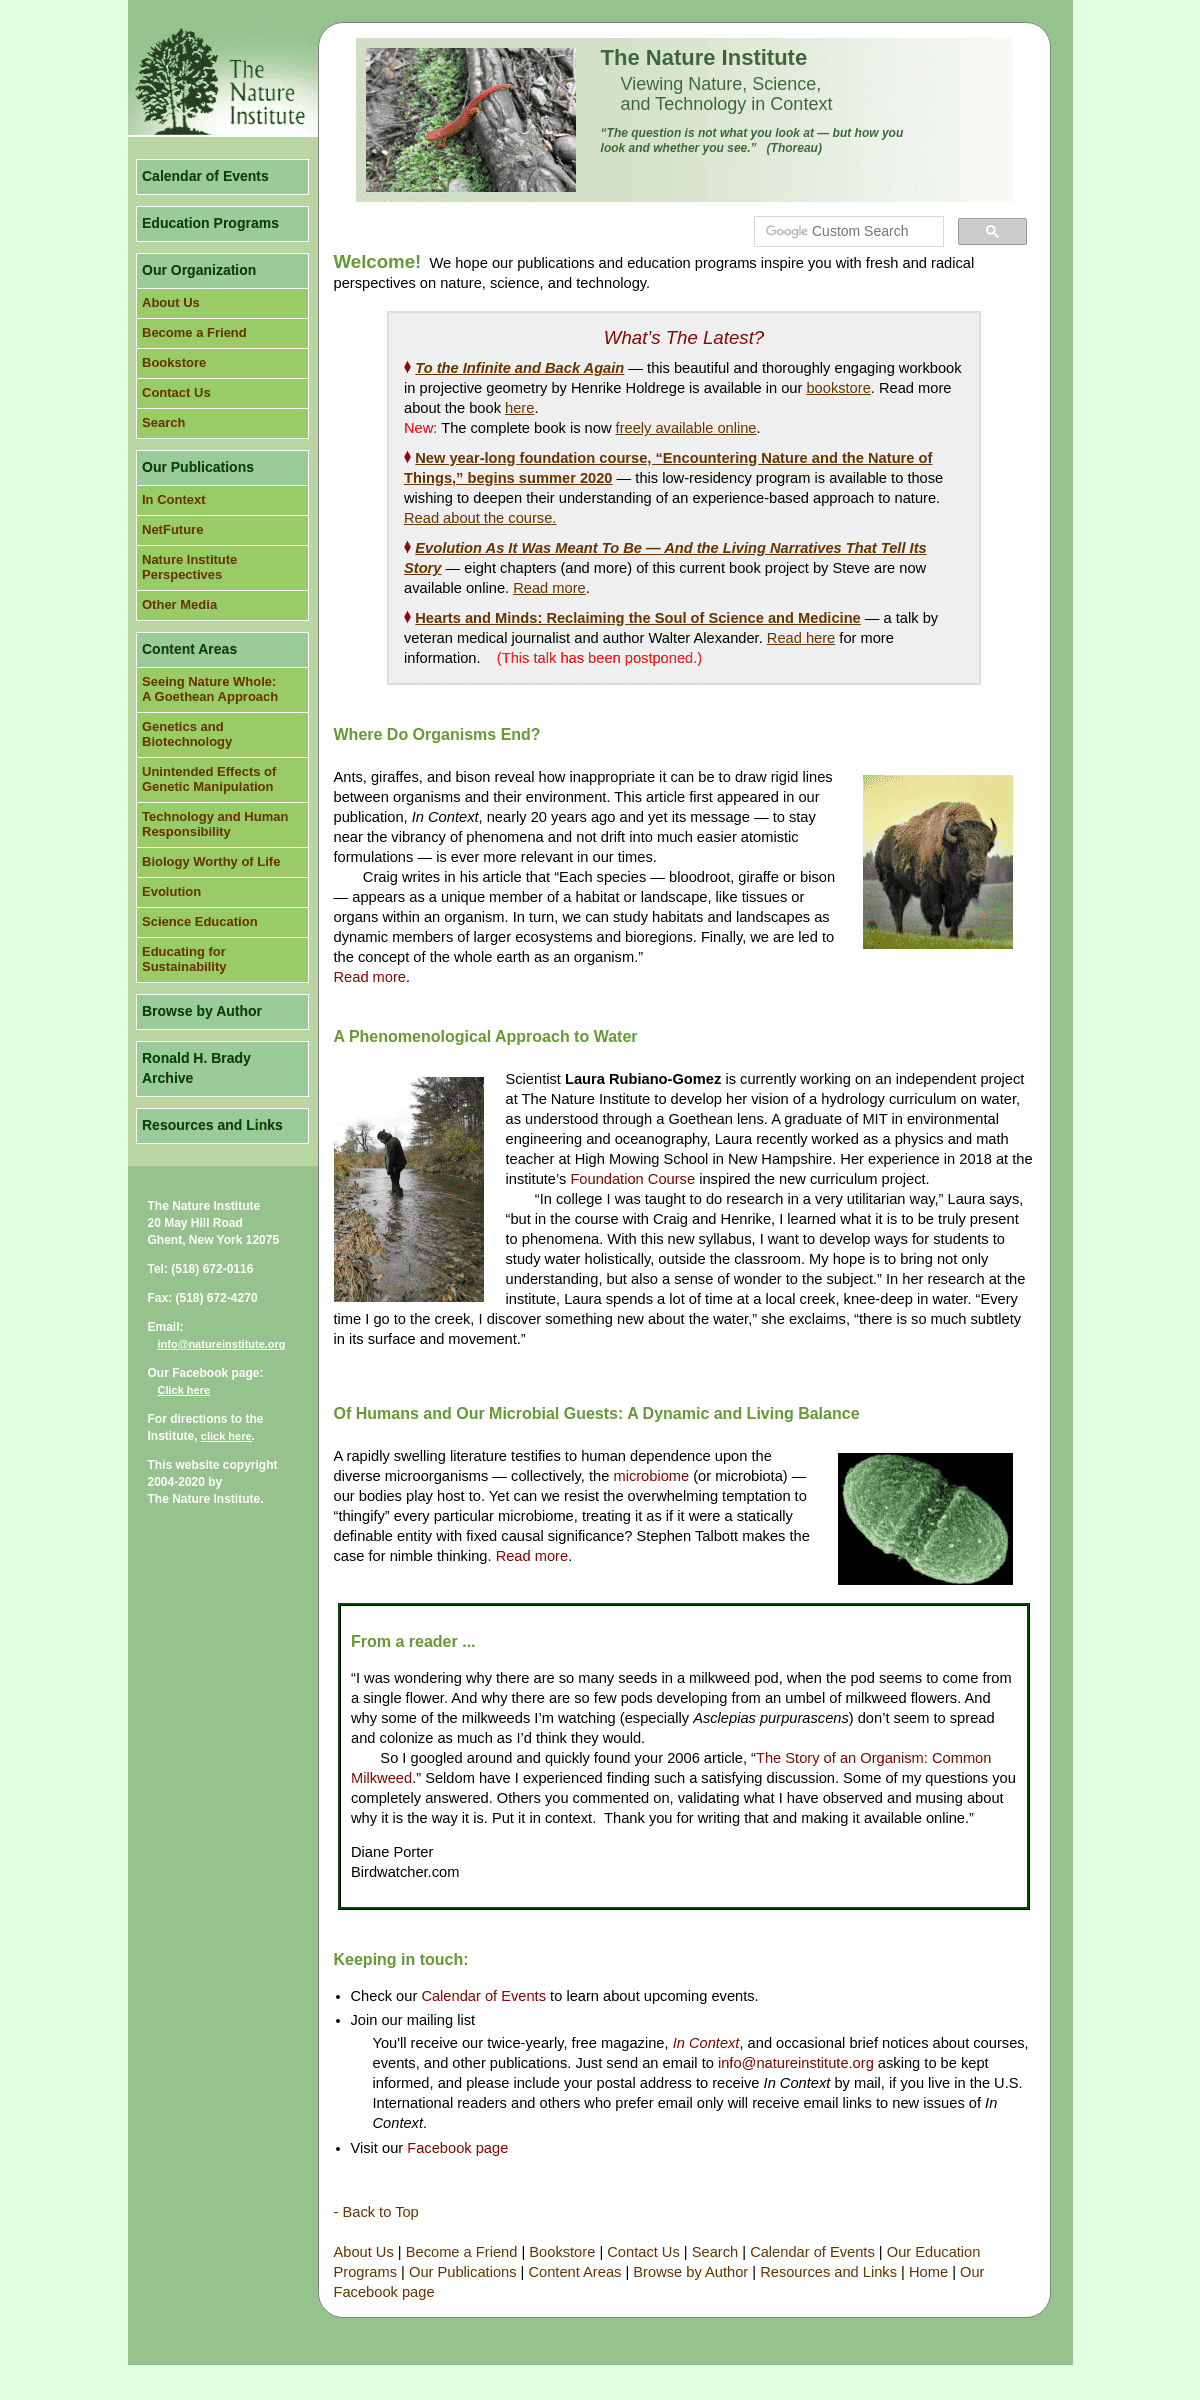 A complete backup of natureinstitute.org